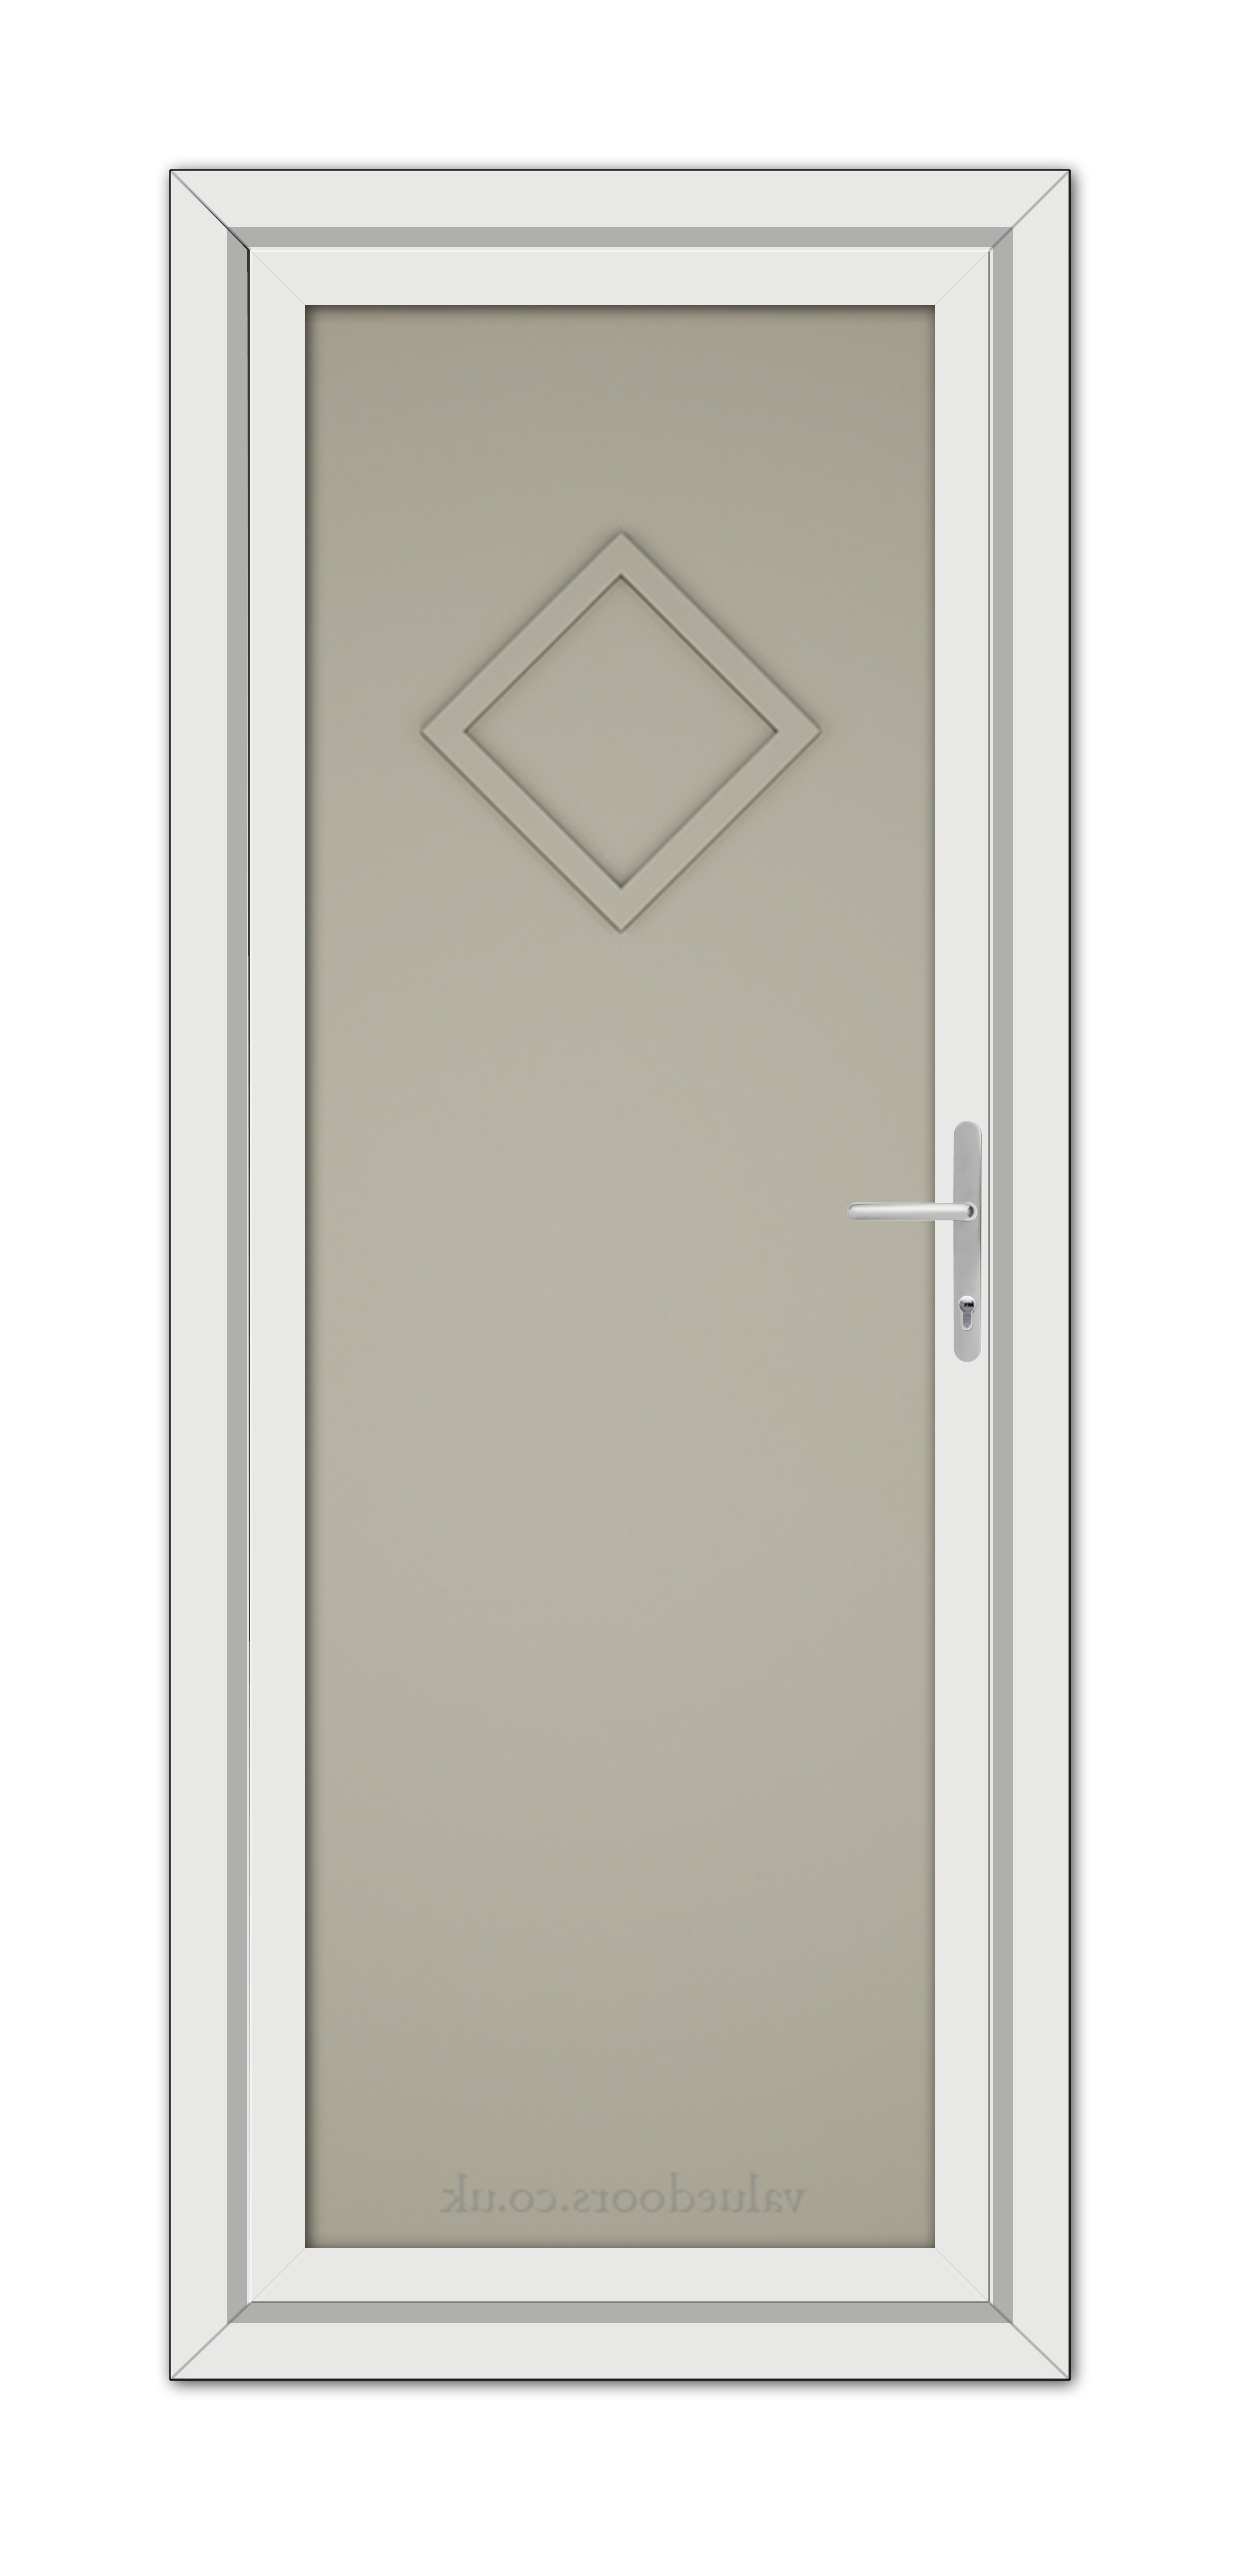 A Pebble Grey Modern 5131 Solid uPVC Door with a frosted glass panel featuring a diamond-shaped design and a white frame, equipped with a silver handle on the right side.